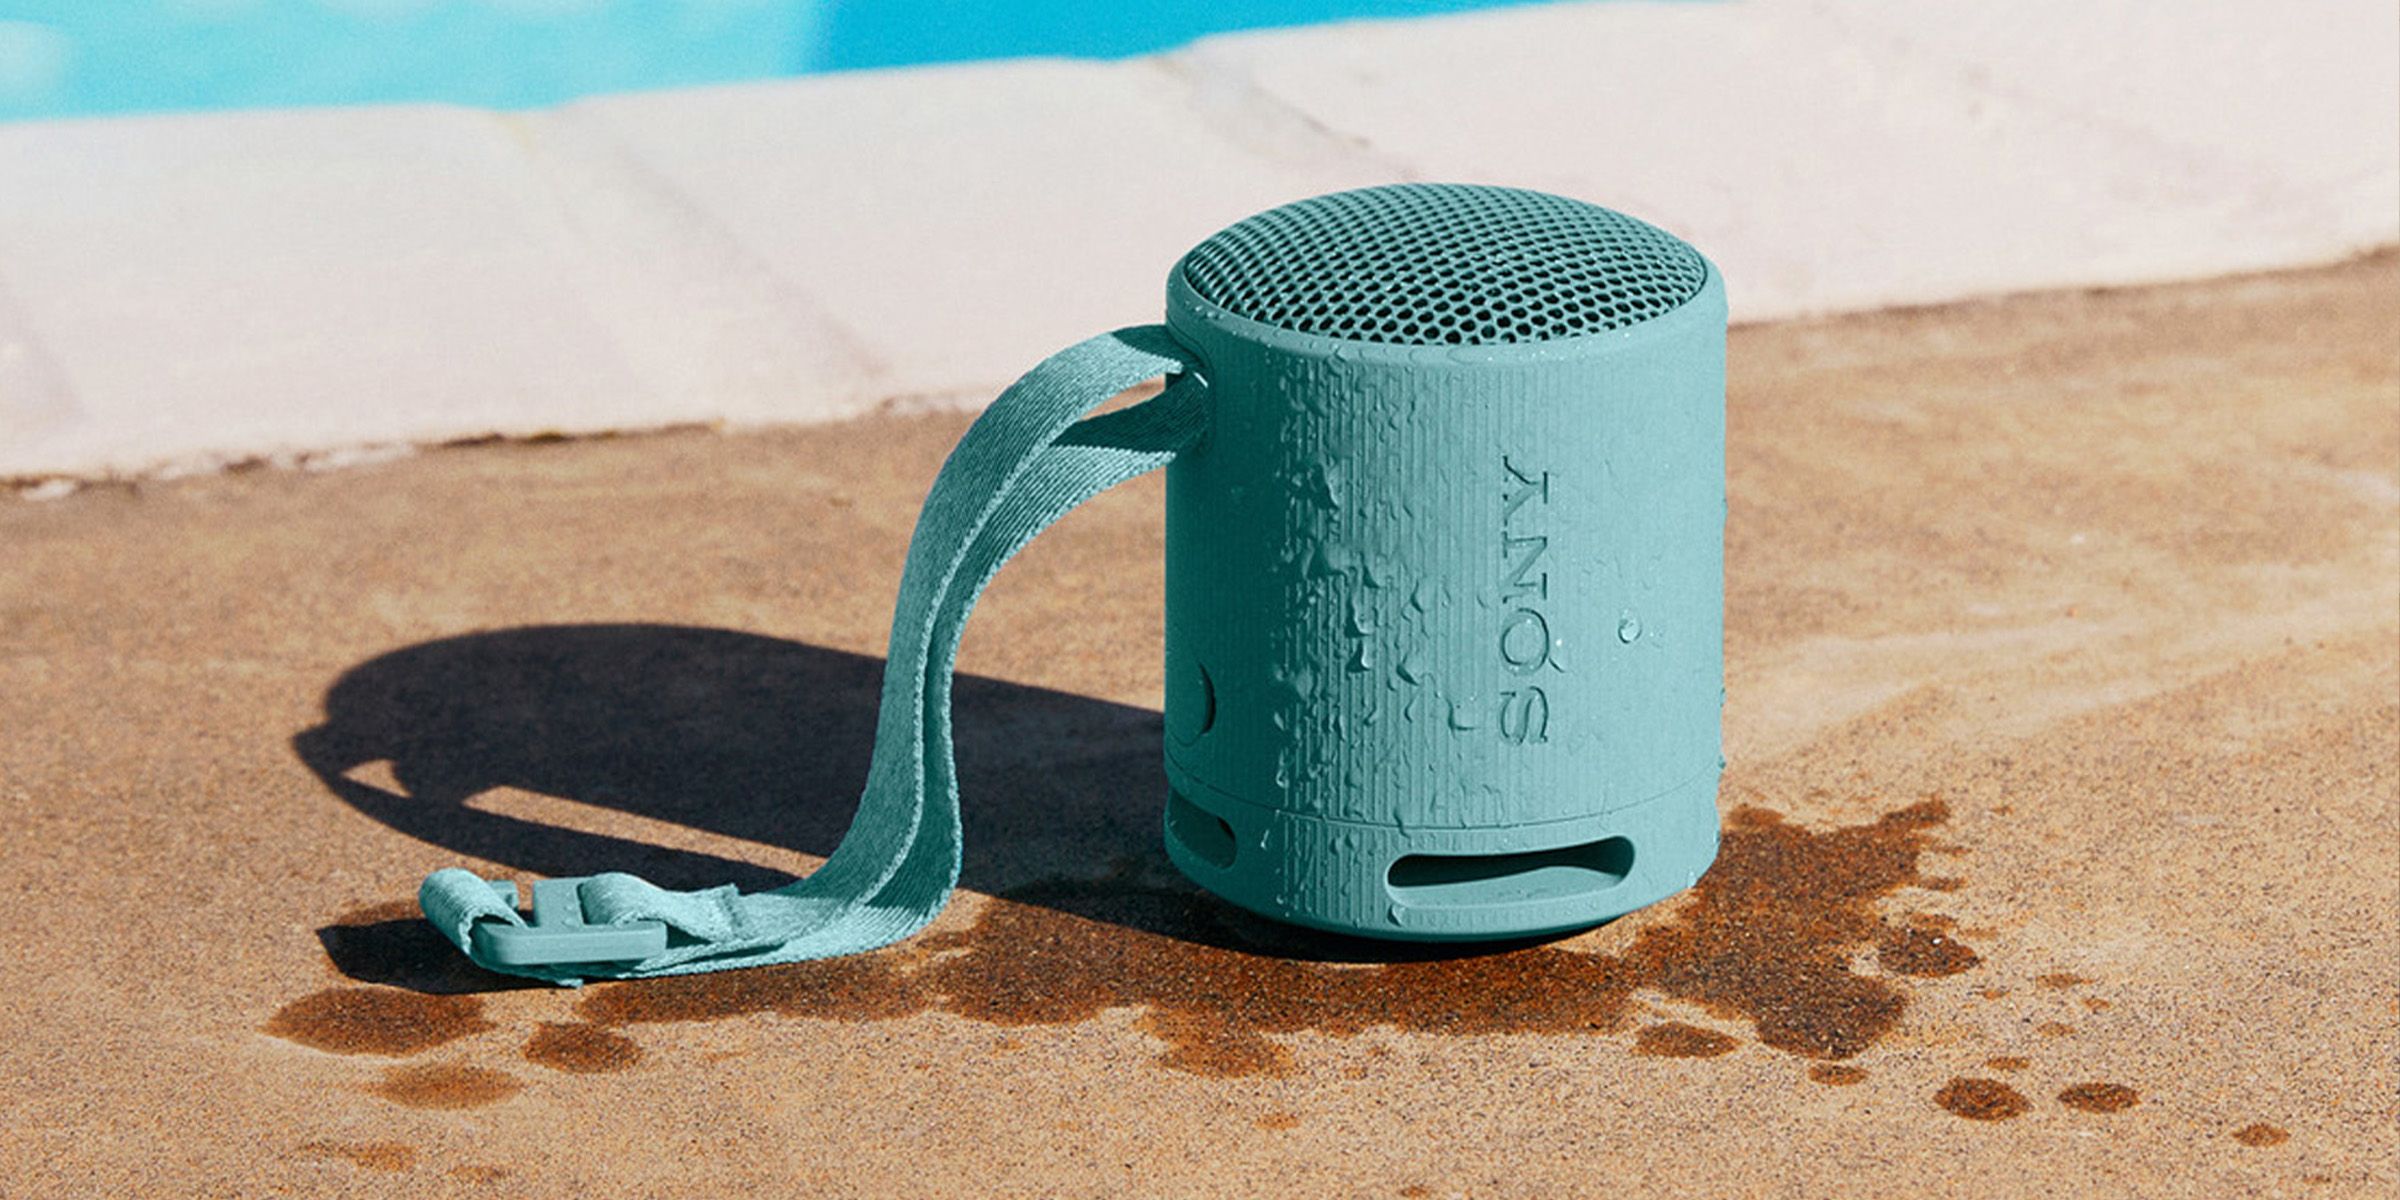 Sony speaker next to a pool, wet, showing water resistance